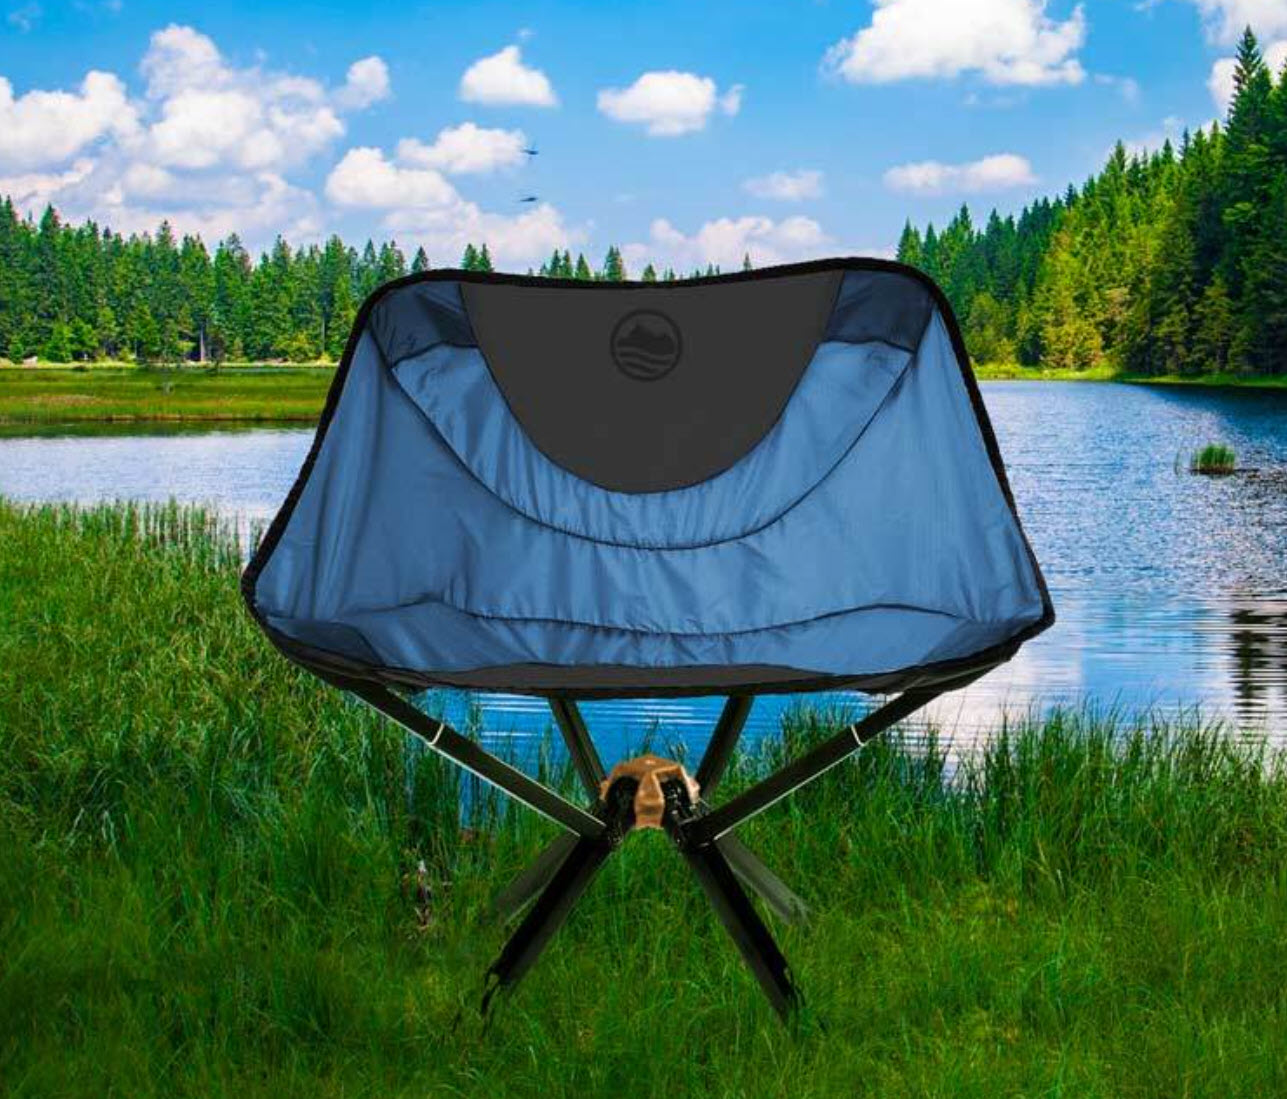 Cliq Camping Chair Most Funded Portable Chair In Crowdfunding History In 2021 Portable Chair Backpacking Chair Outdoor Folding Chairs